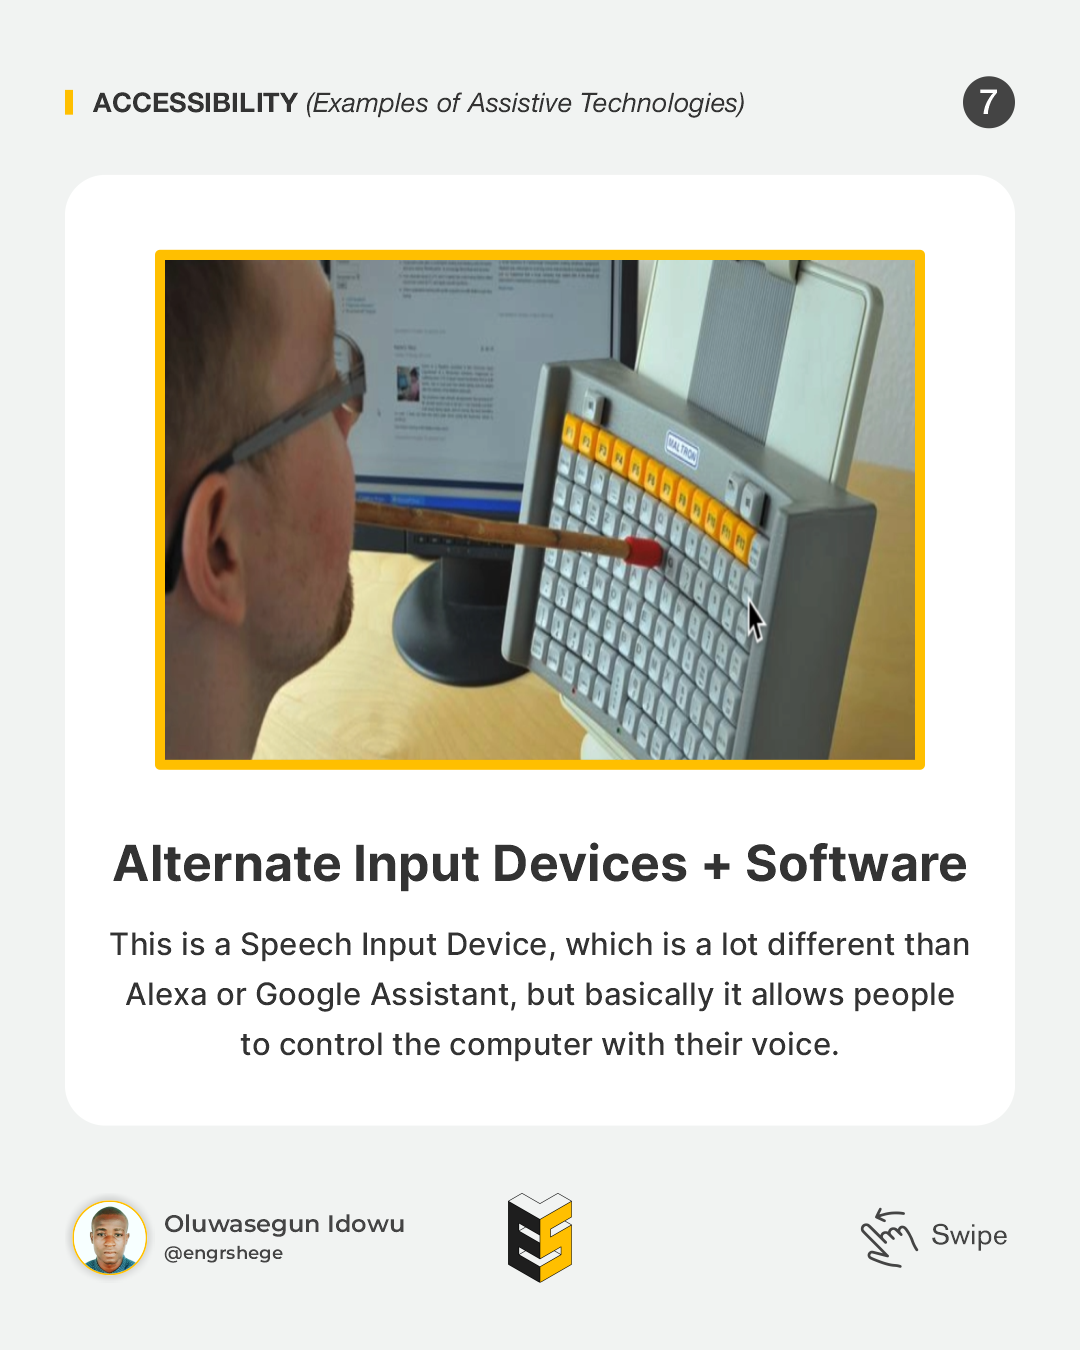 7. Examples of Assistive Technologies (Alternate Input Device + Software)